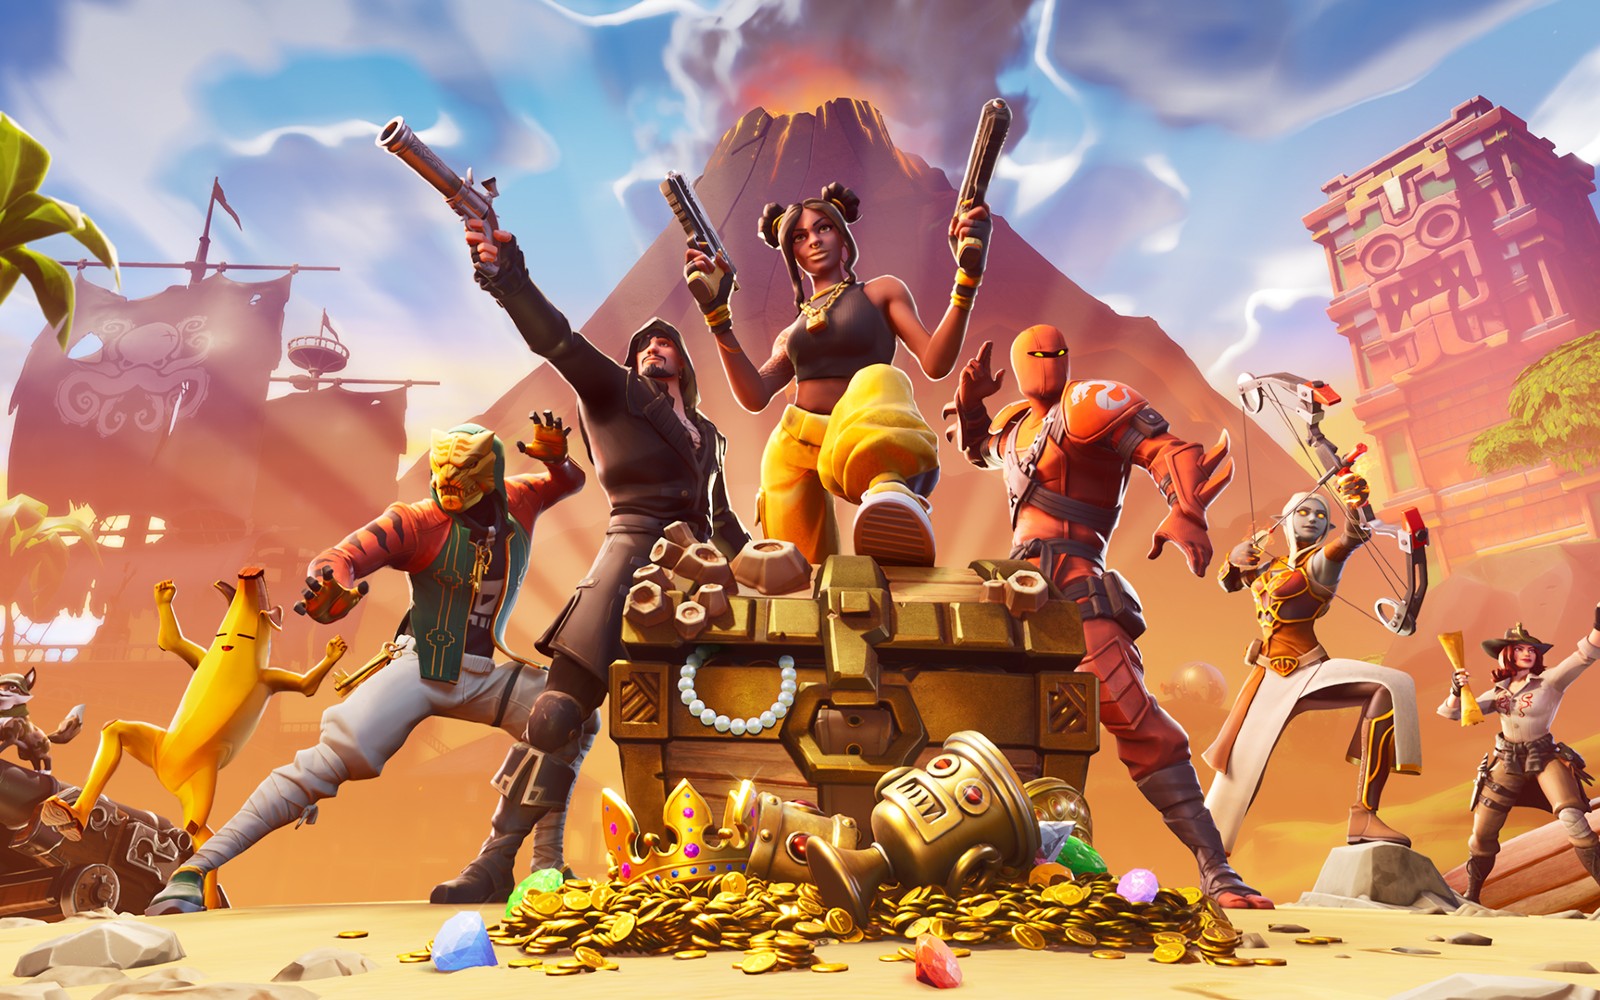 Epic will donate two weeks of 'Fortnite' proceeds to humanitarian efforts in Ukr..